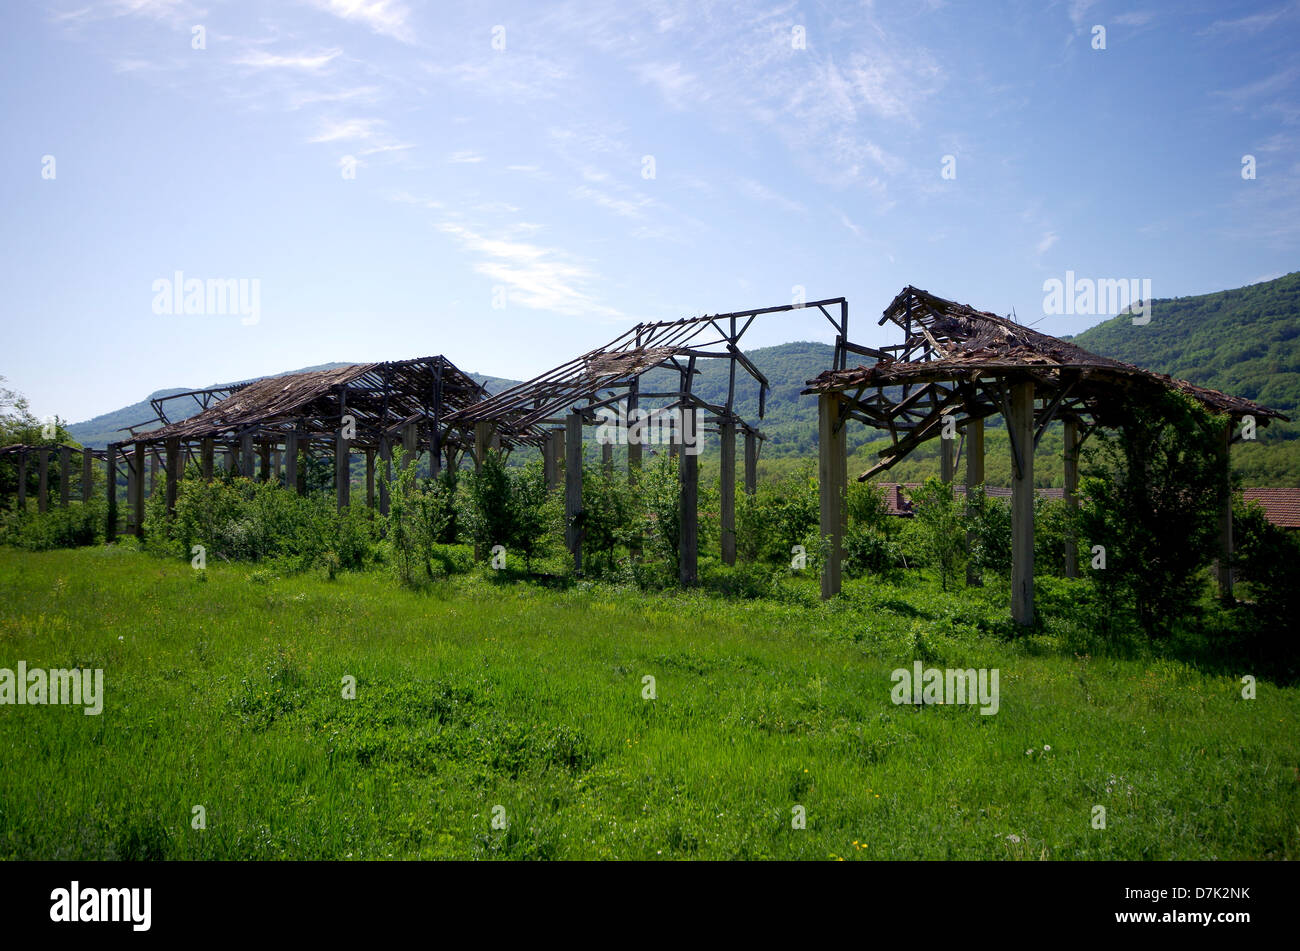 Abandoned agricultural property. Stock Photo